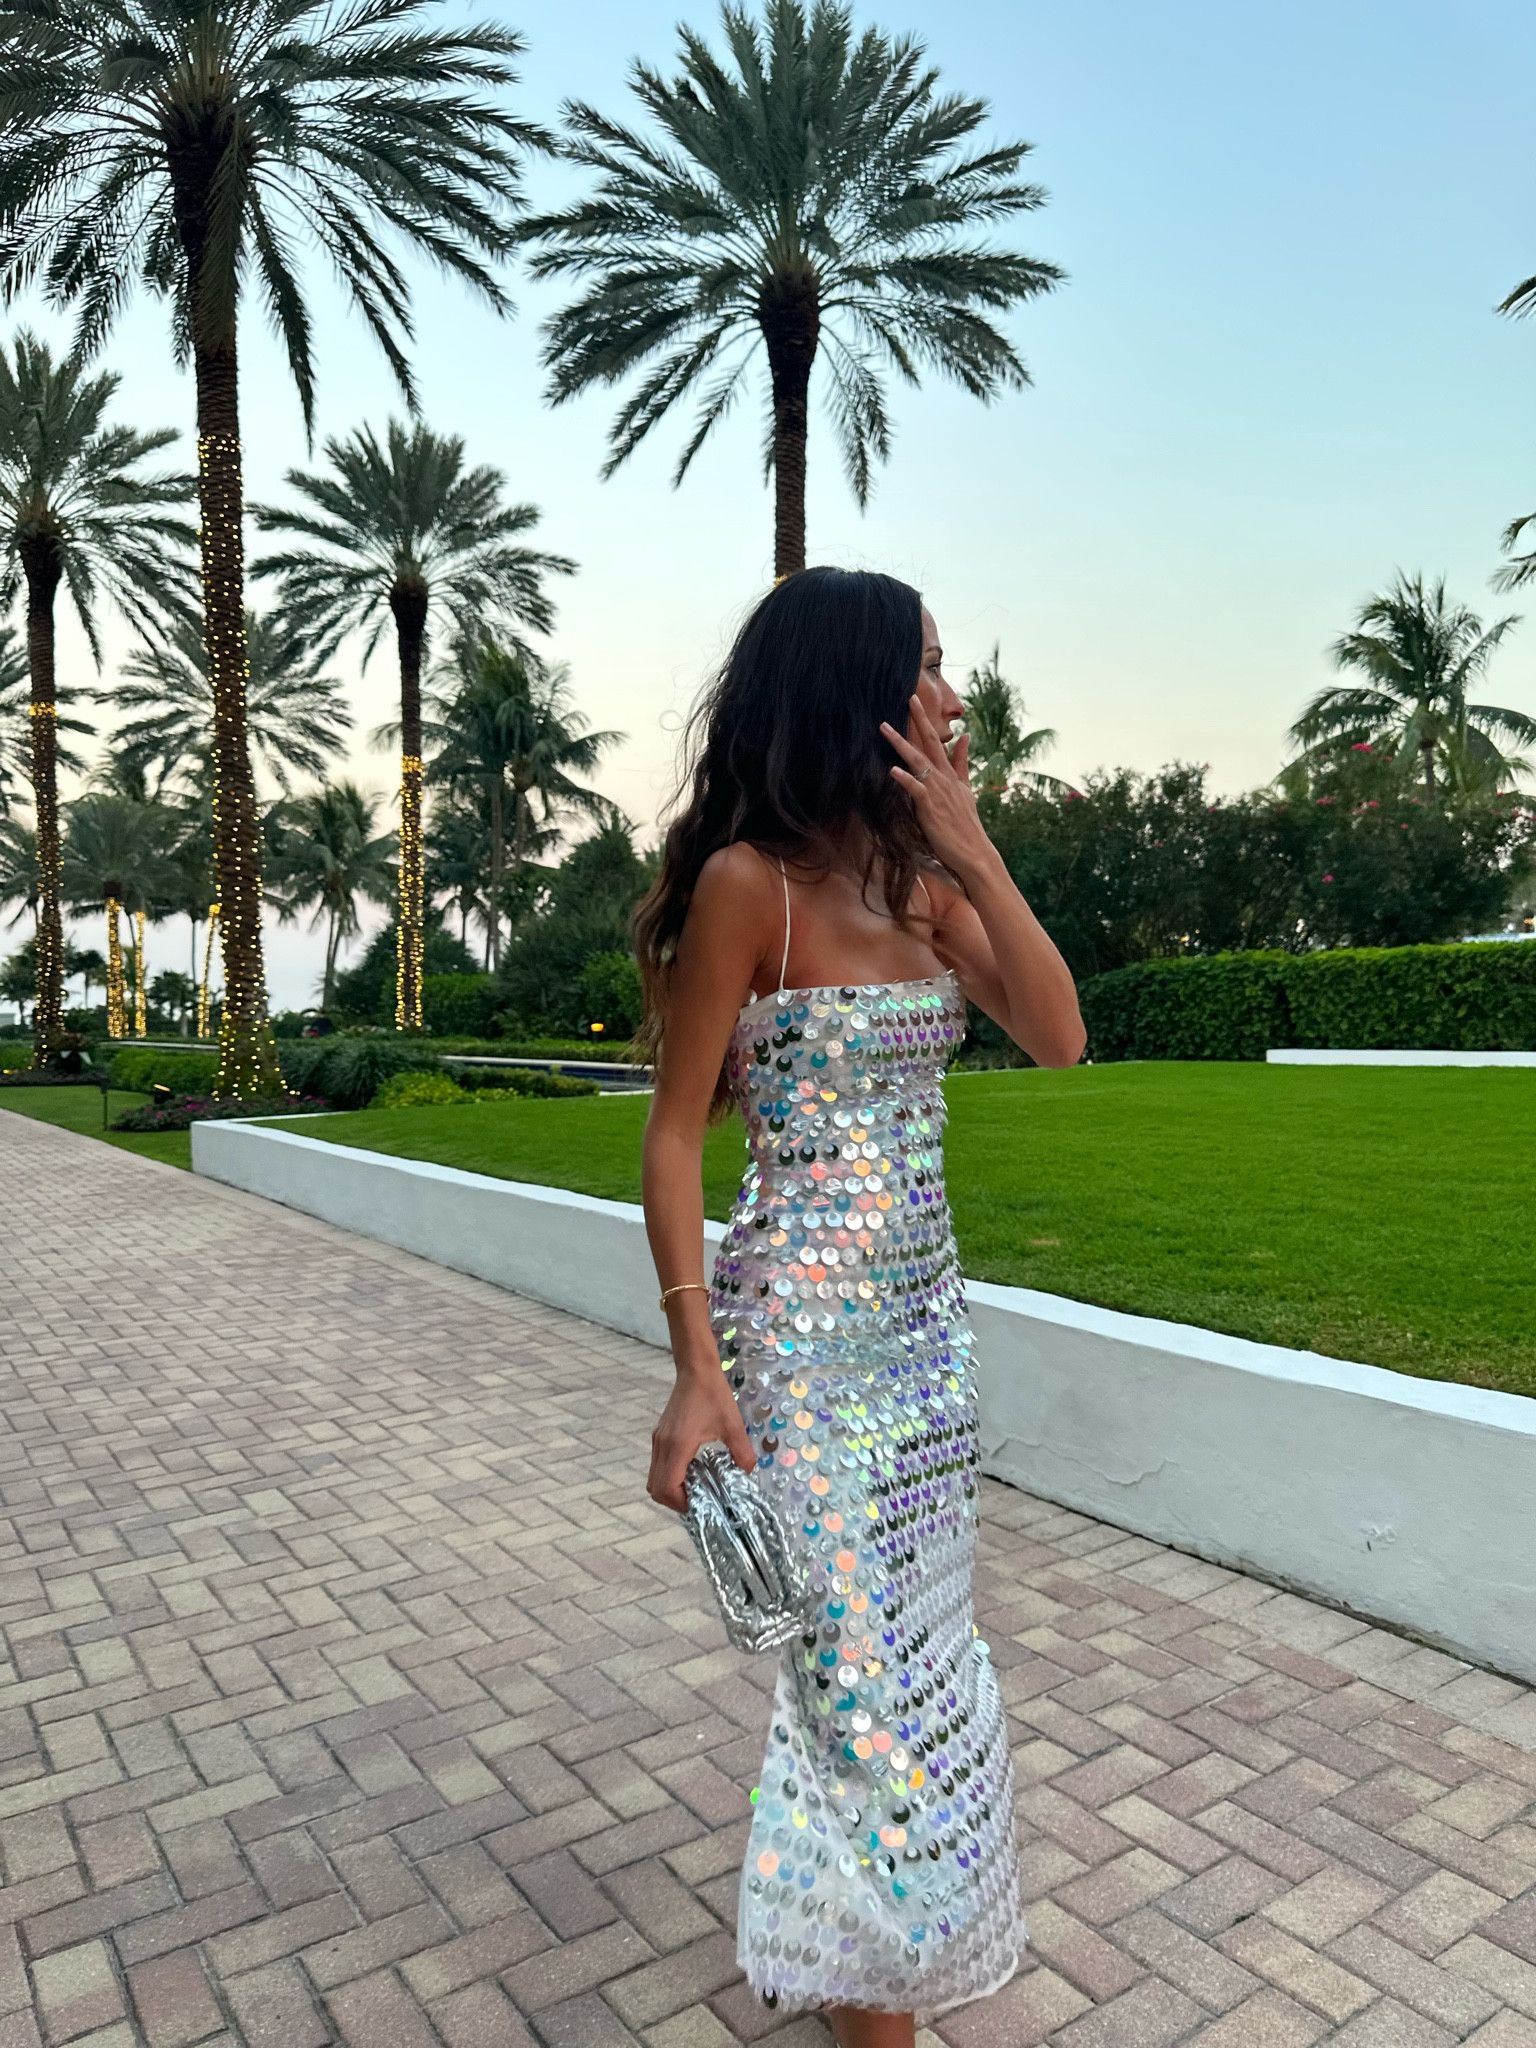 How to Style Mermaid Midi Dress: Best 13 Ladylike Outfit Ideas for Women